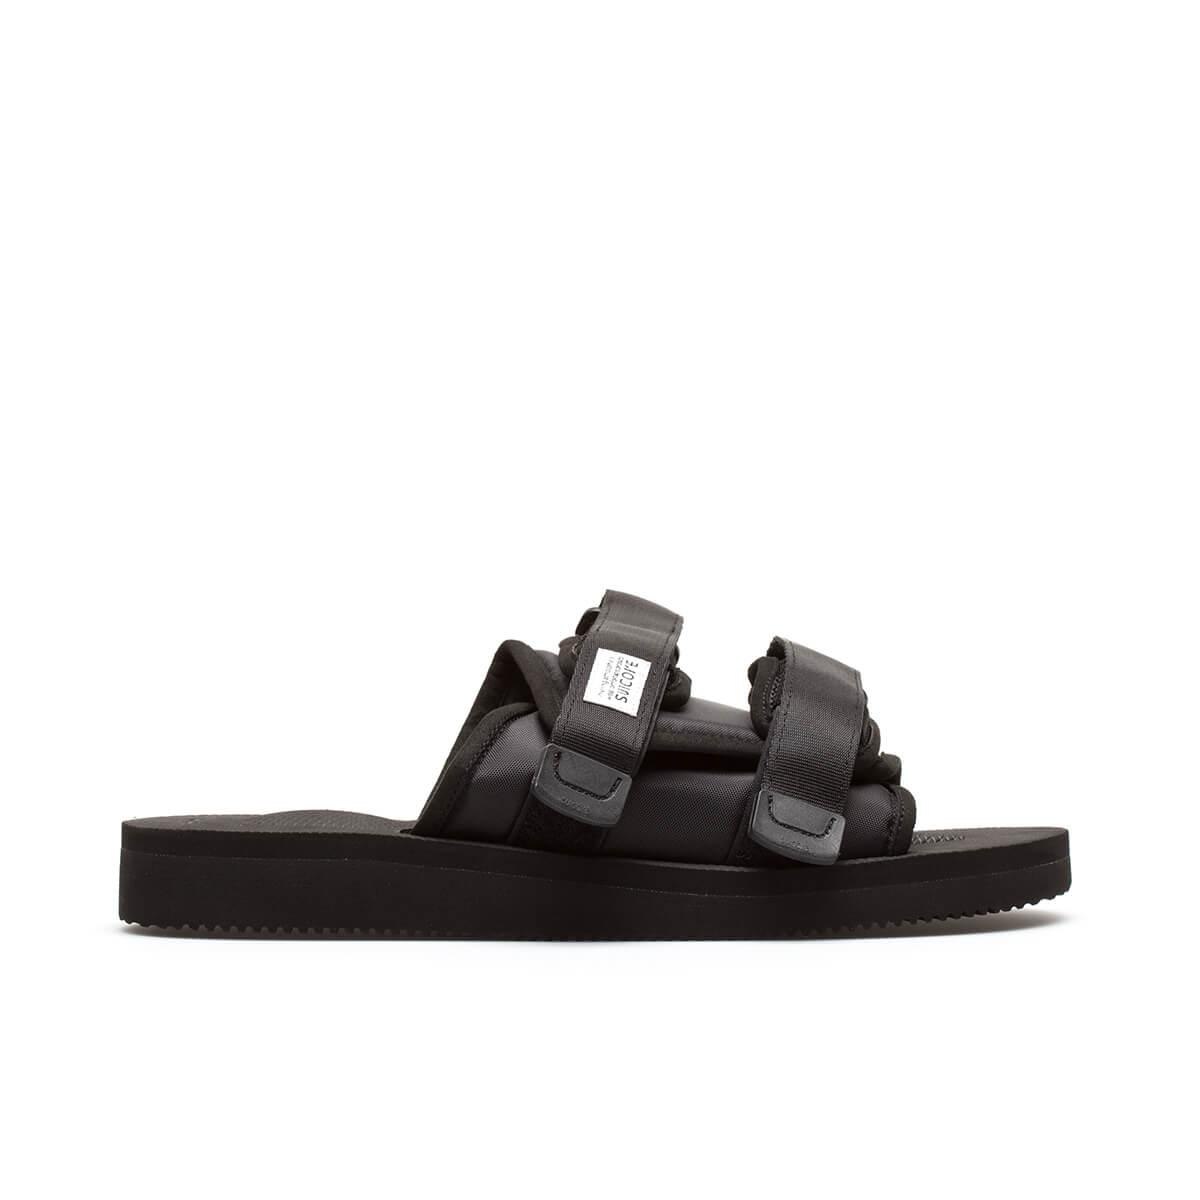 Suicoke Synthetic Moto Cab Slippers in Black for Men - Lyst